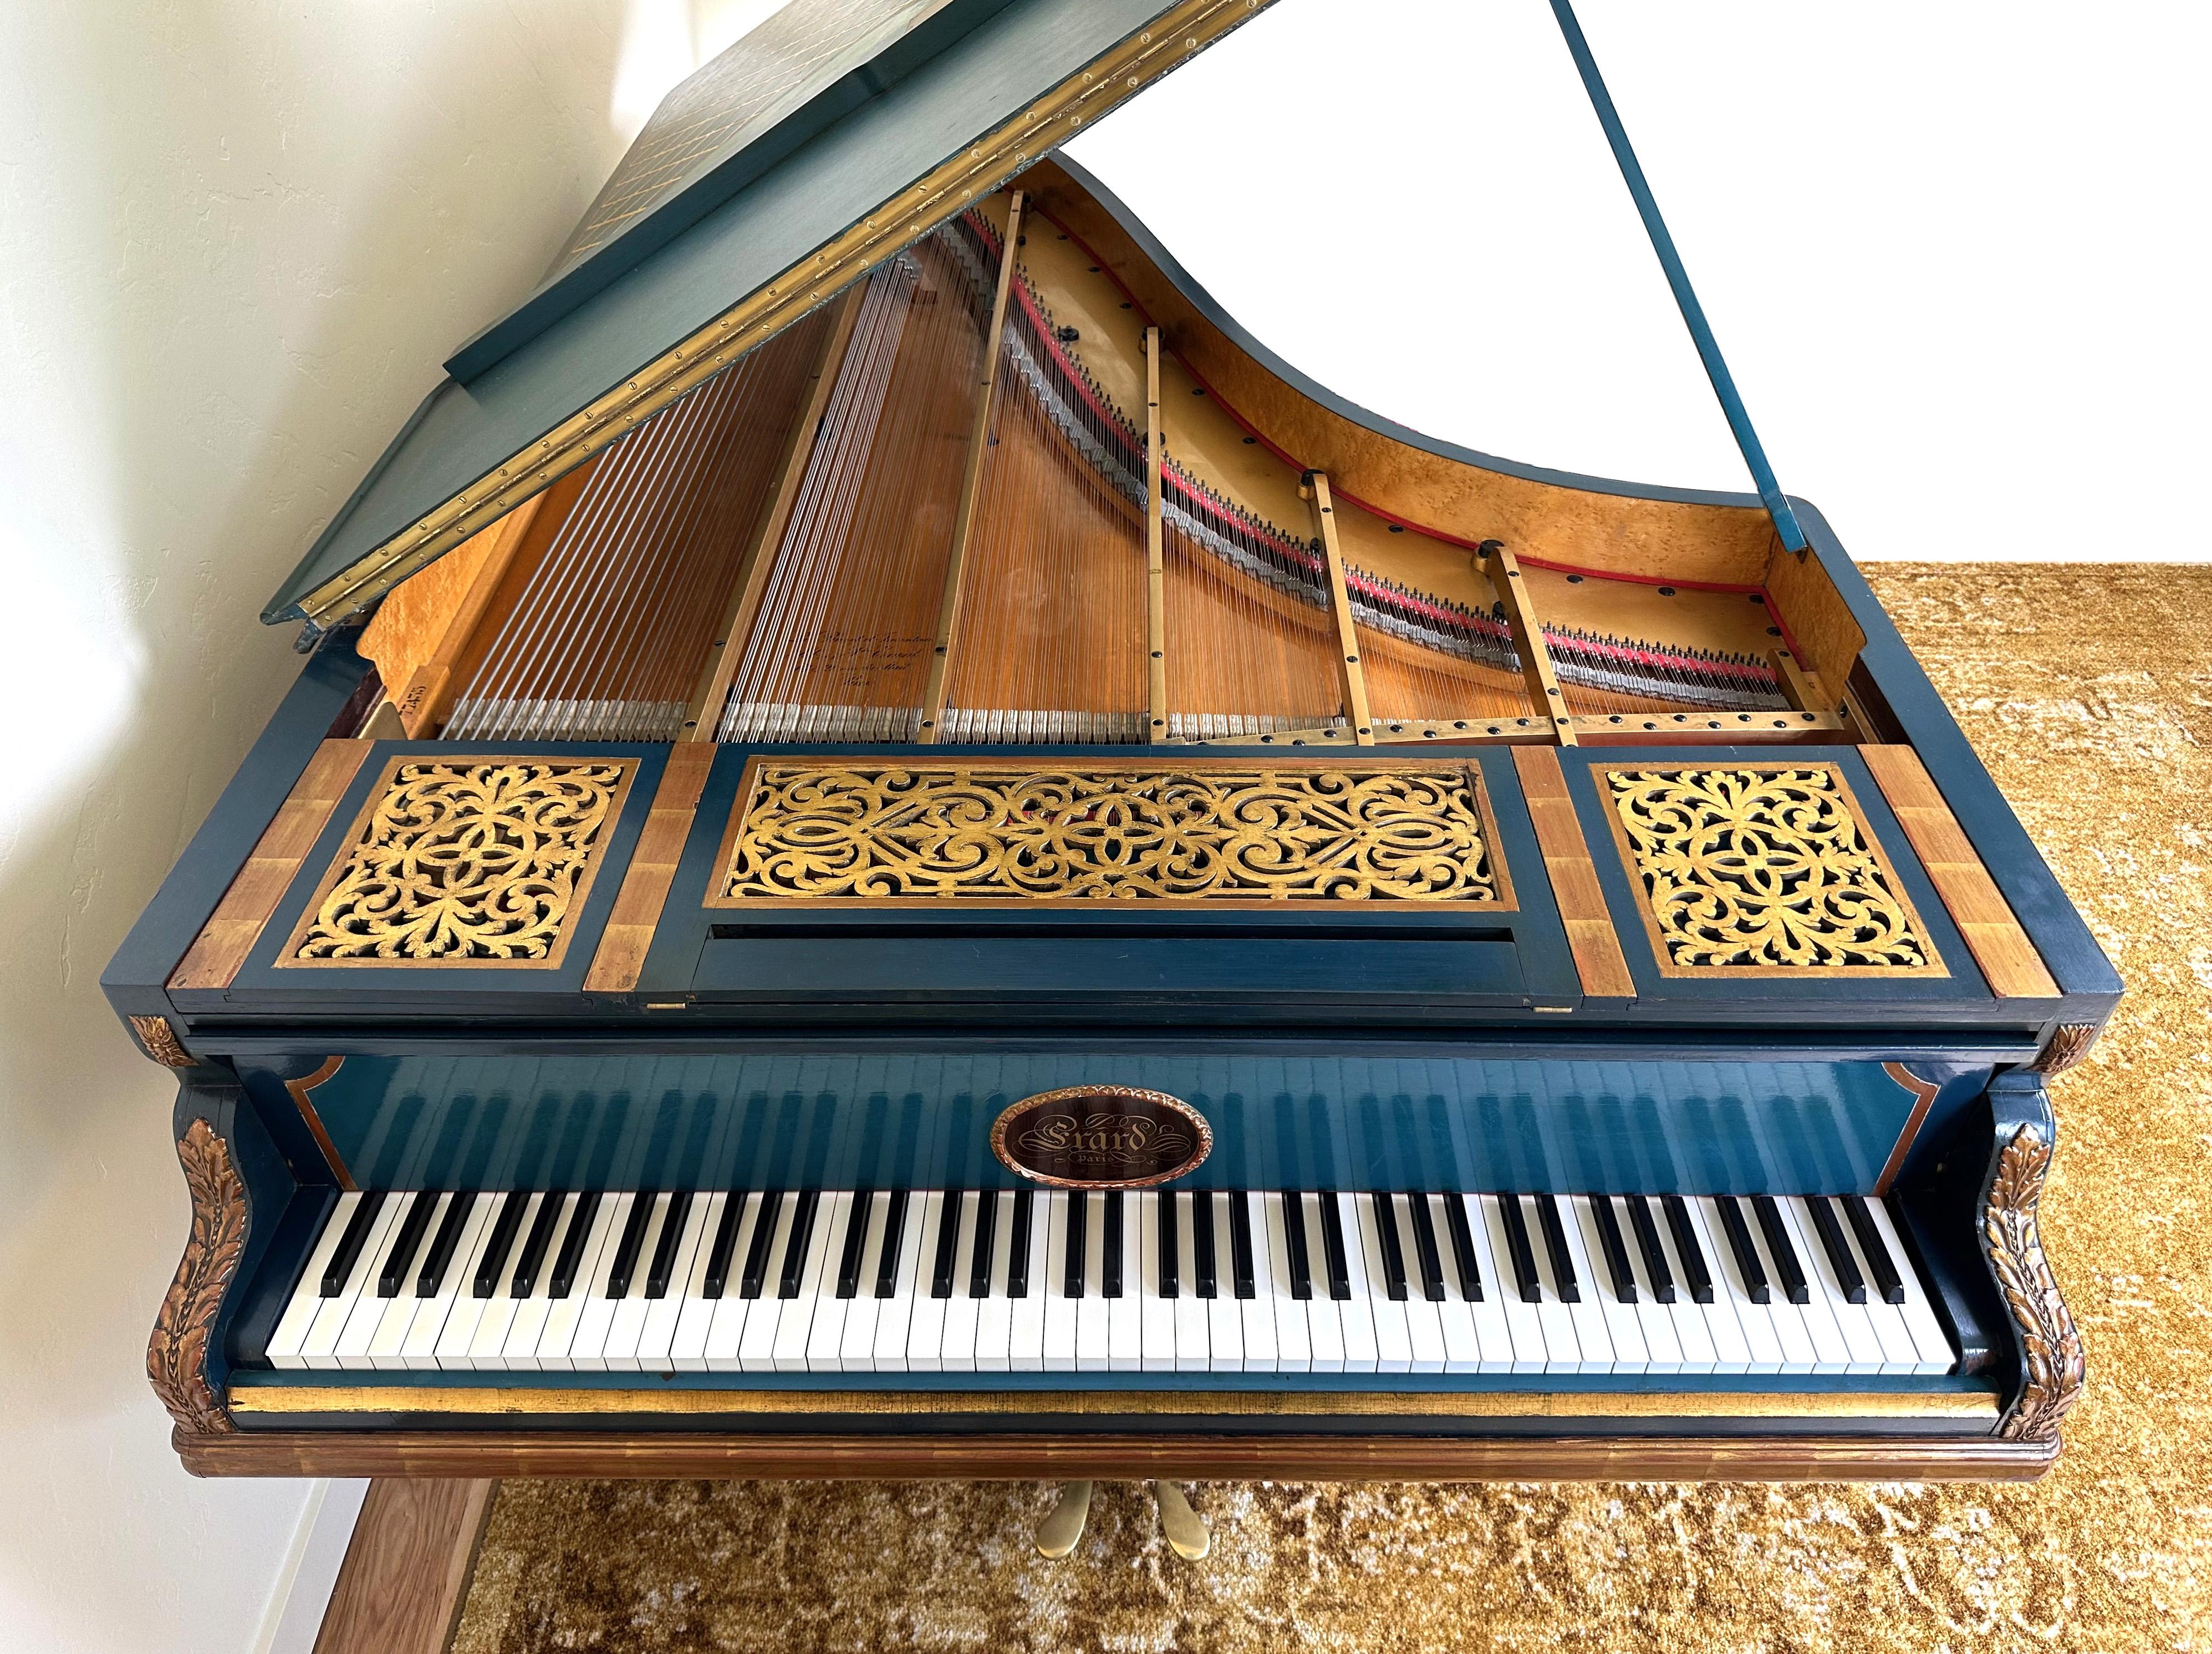 This beautiful grand piano was built by Erard in Paris in 1895.

With irreplaceable original cabinet art created and signed by an artist named Finel - specifically commissioned by the original purchaser - this piano retains original ivory keys, as